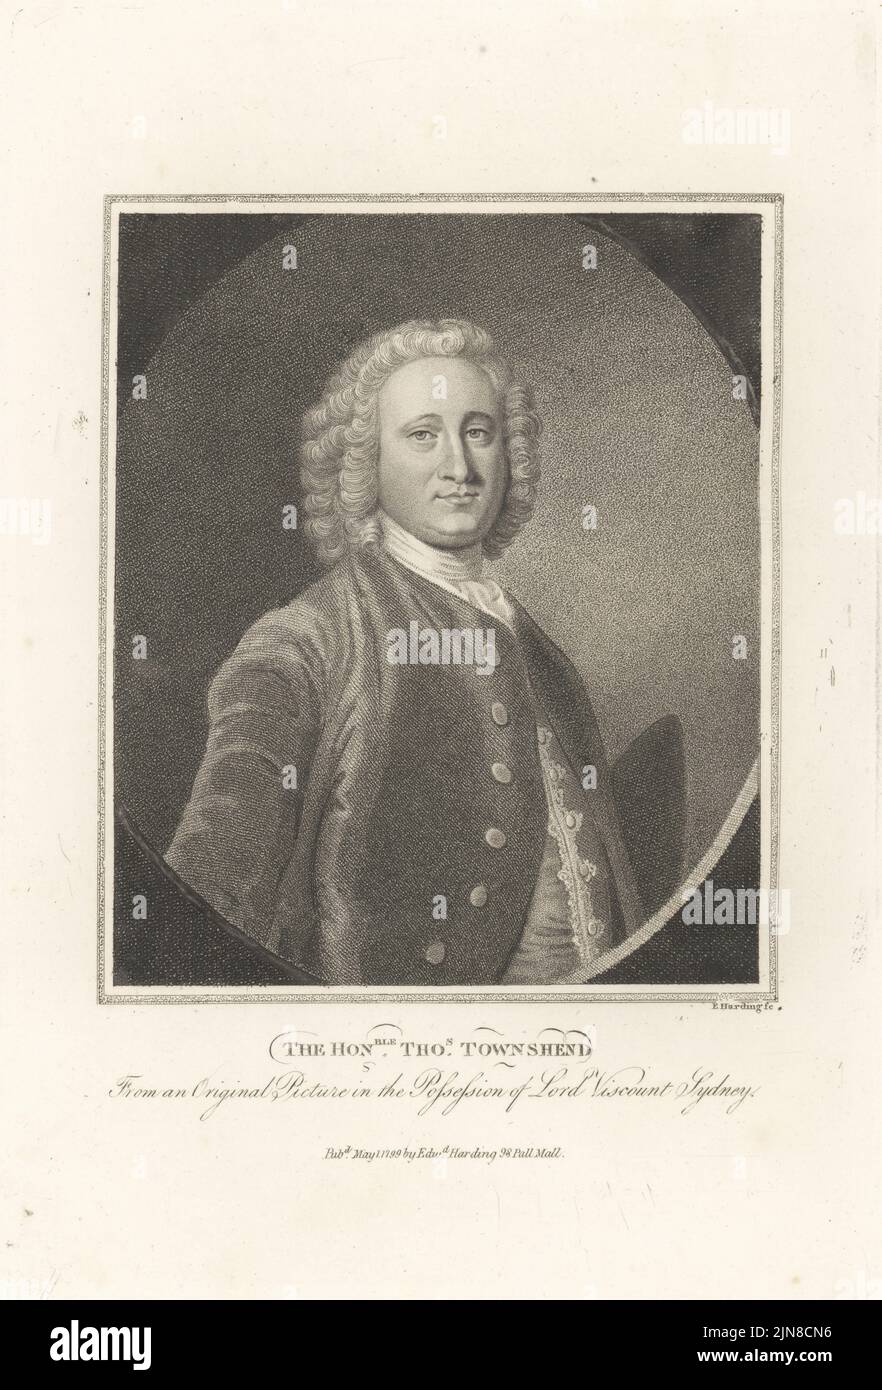 Thomas Townshend, British Whig politician and scholar, 1701-1780. Educated at Eton and King's College, Cambridge. MP for Winchelsea. Father of Thomas Townshend, 1st Viscount Sydney. The Honourable Thos. Townshend. Copperplate engraving by Edward Harding from John Adolphus’ The British Cabinet, containing Portraits of Illustrious Personages, printed by T. Bensley for E. Harding, 98 Pall Mall, London, 1800. Stock Photo